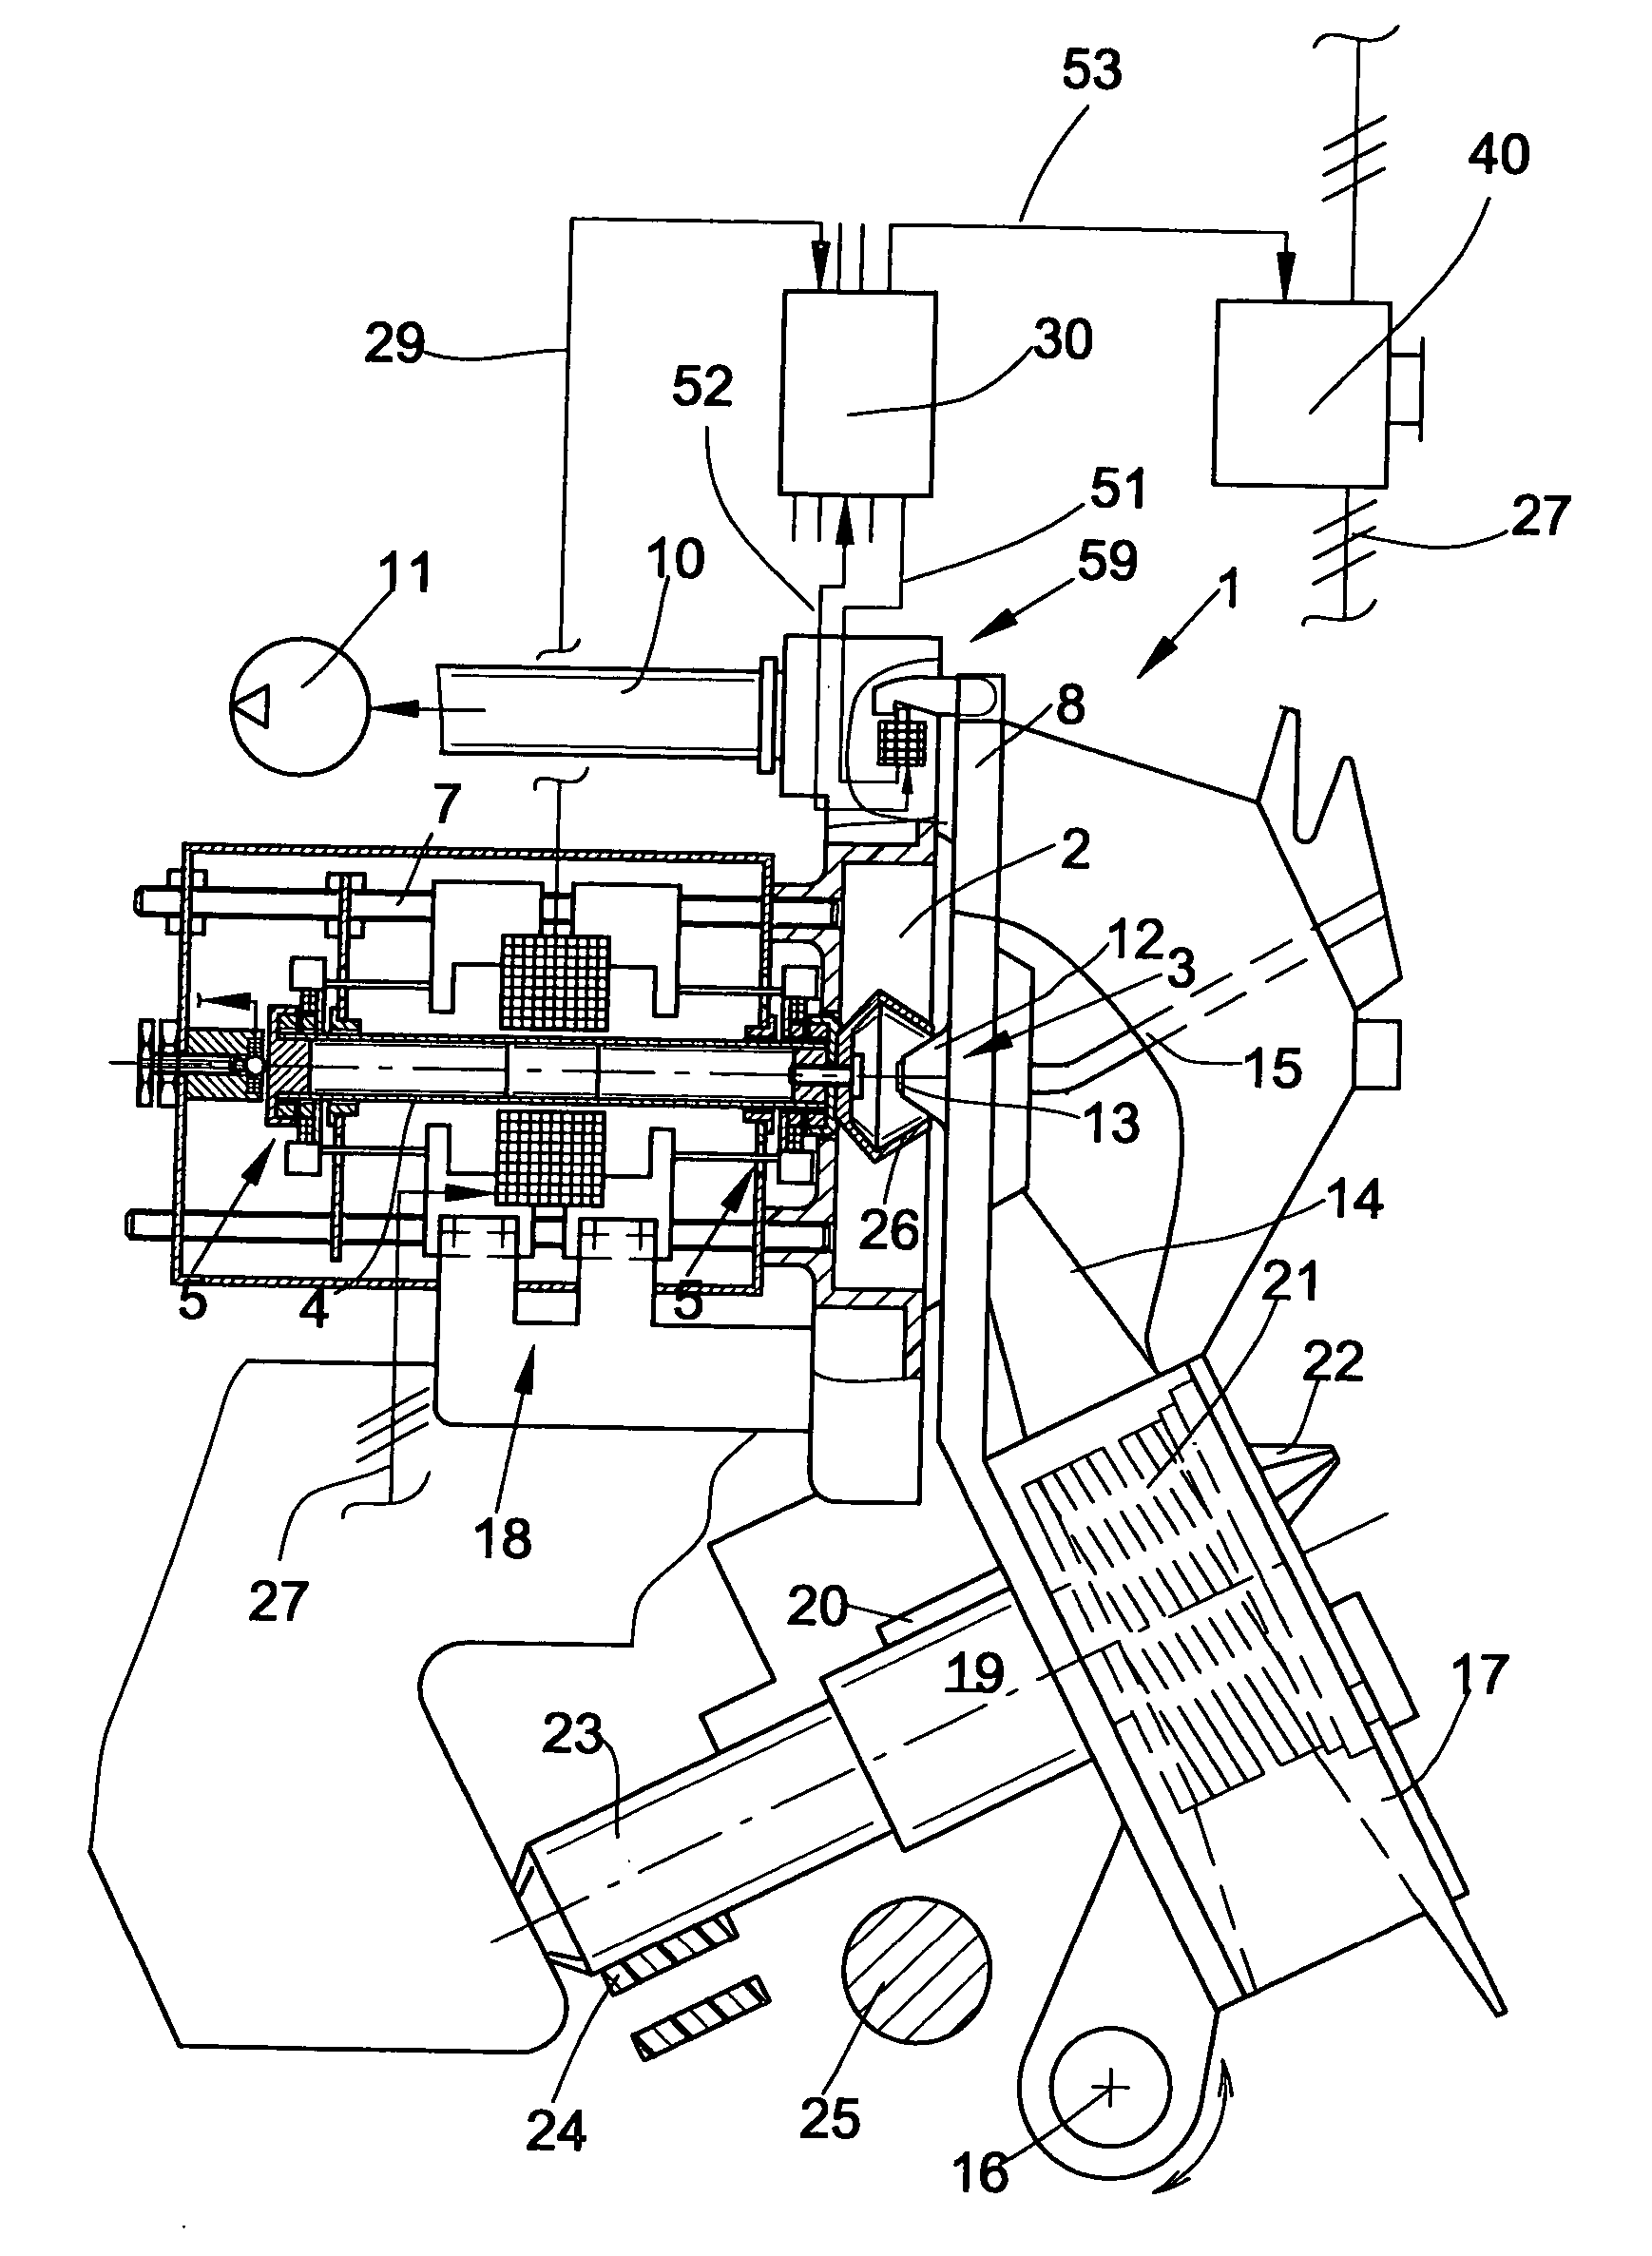 Method and apparatus for operating an open-end rotor spinning unit